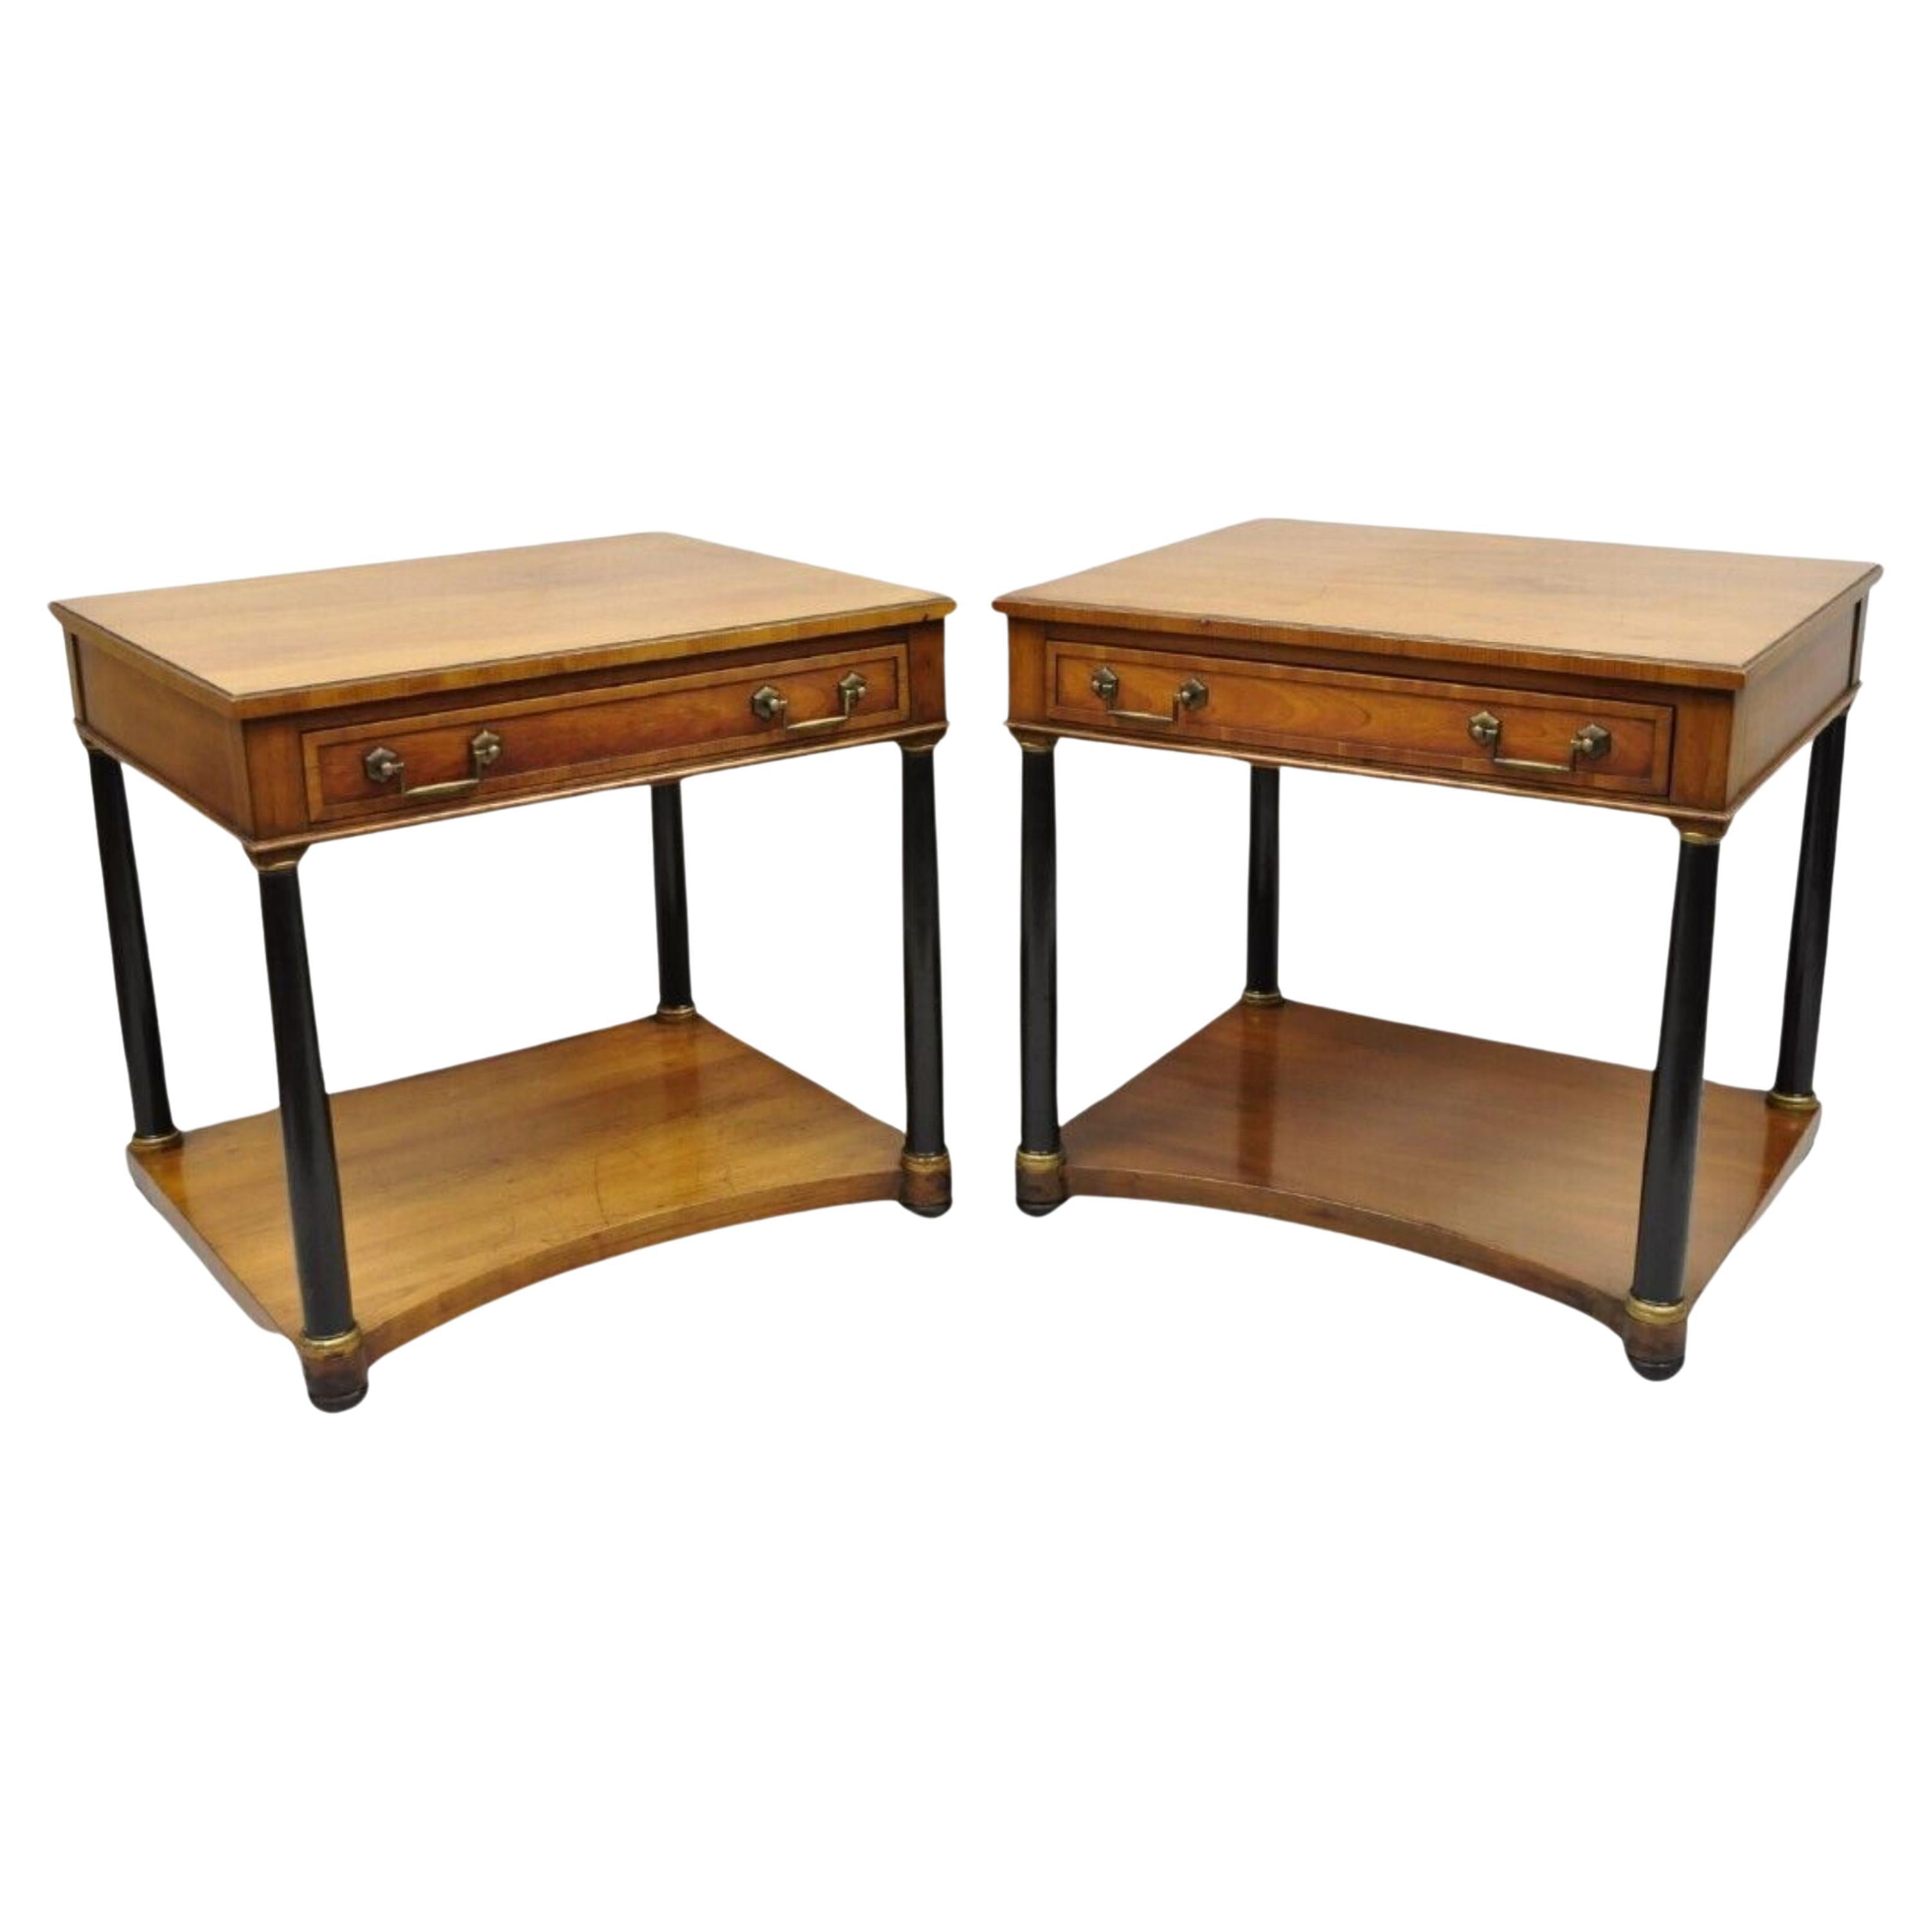 Century French Empire Style Cherry Wood Black Column 1 Drawer End Tables - Pair